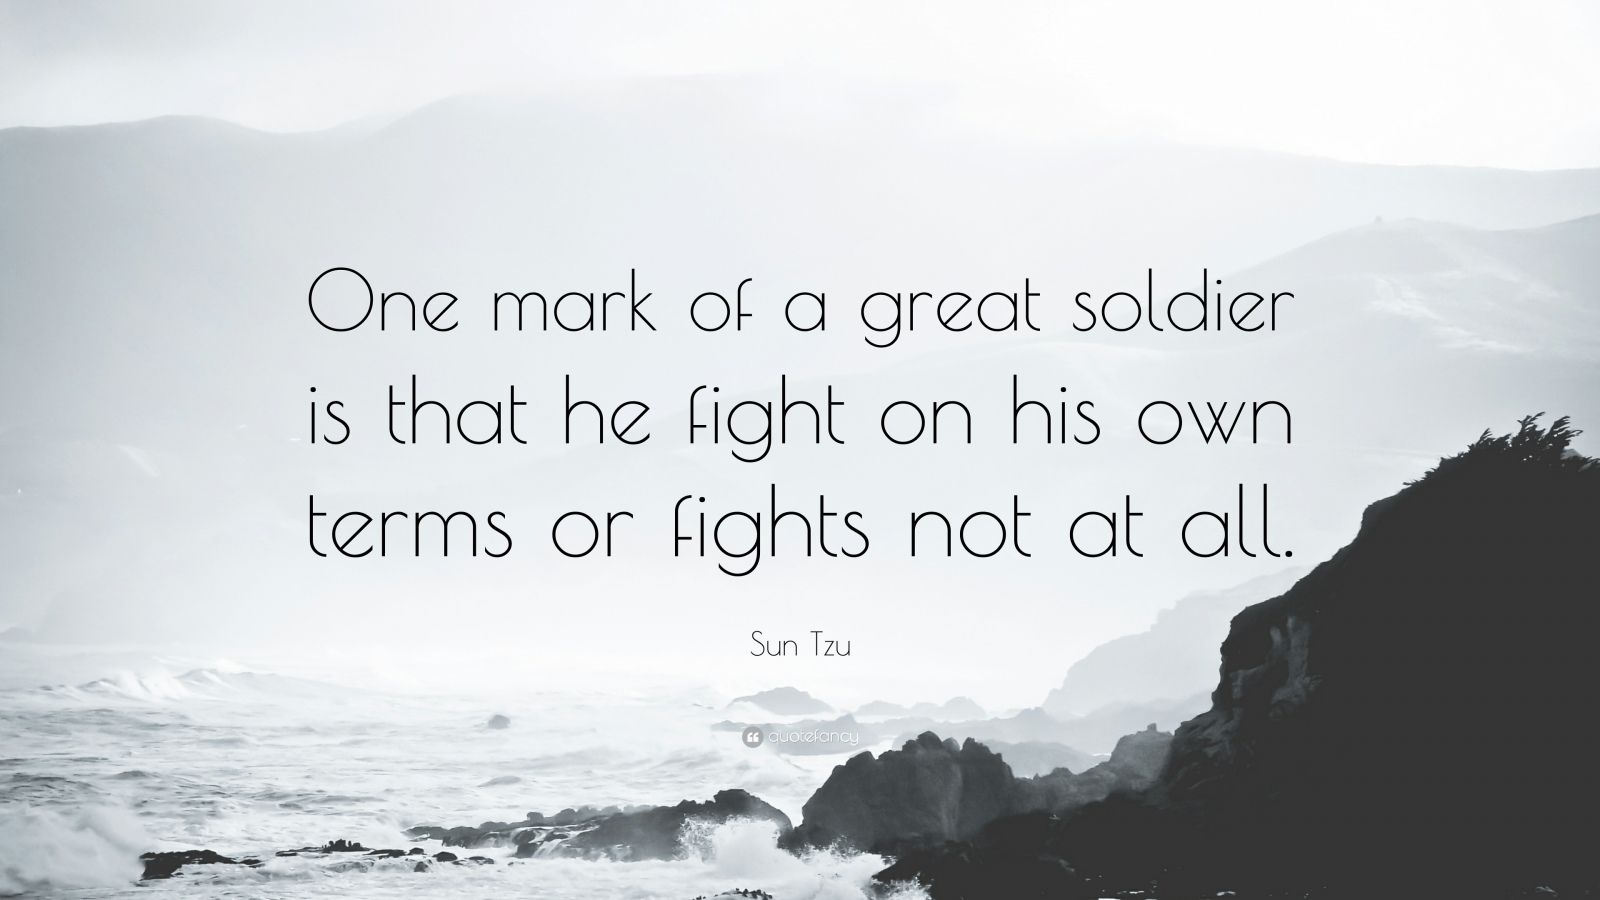 Sun Tzu Quote “ e mark of a great sol r is that he fight on